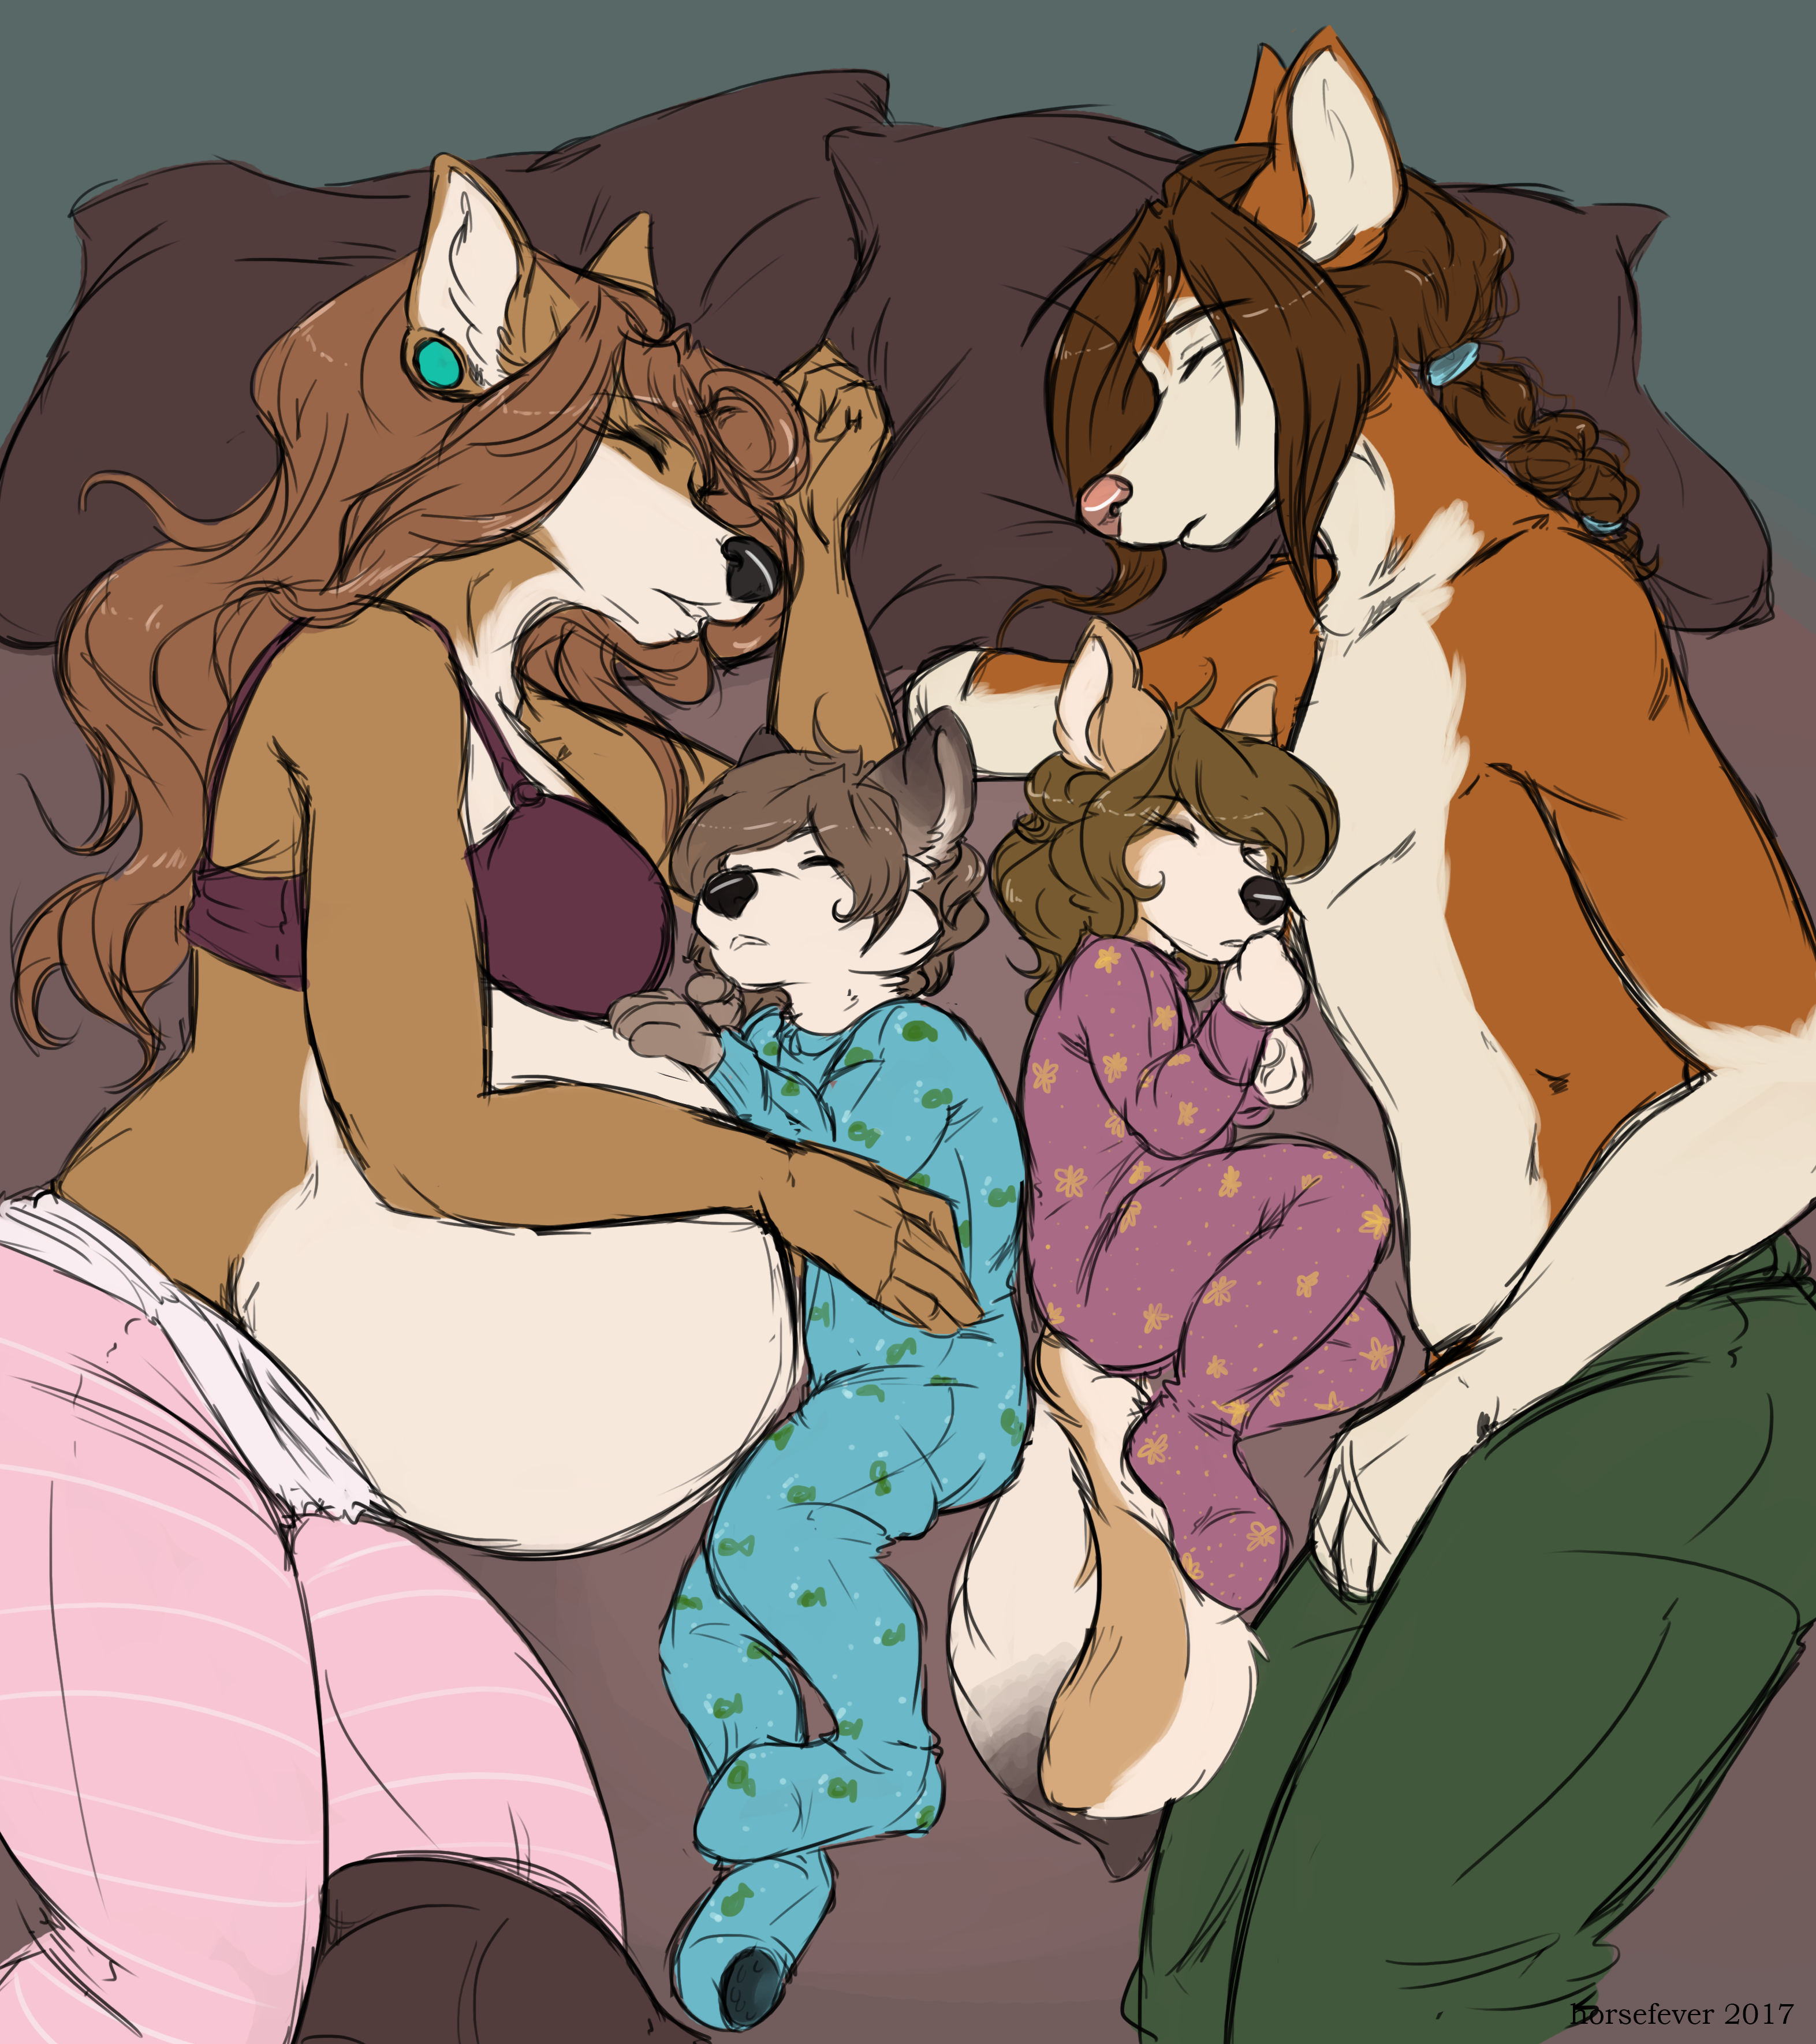 1981120_horsefever_xanderblaze-sleeping-mom-and-dad-with-the-pups